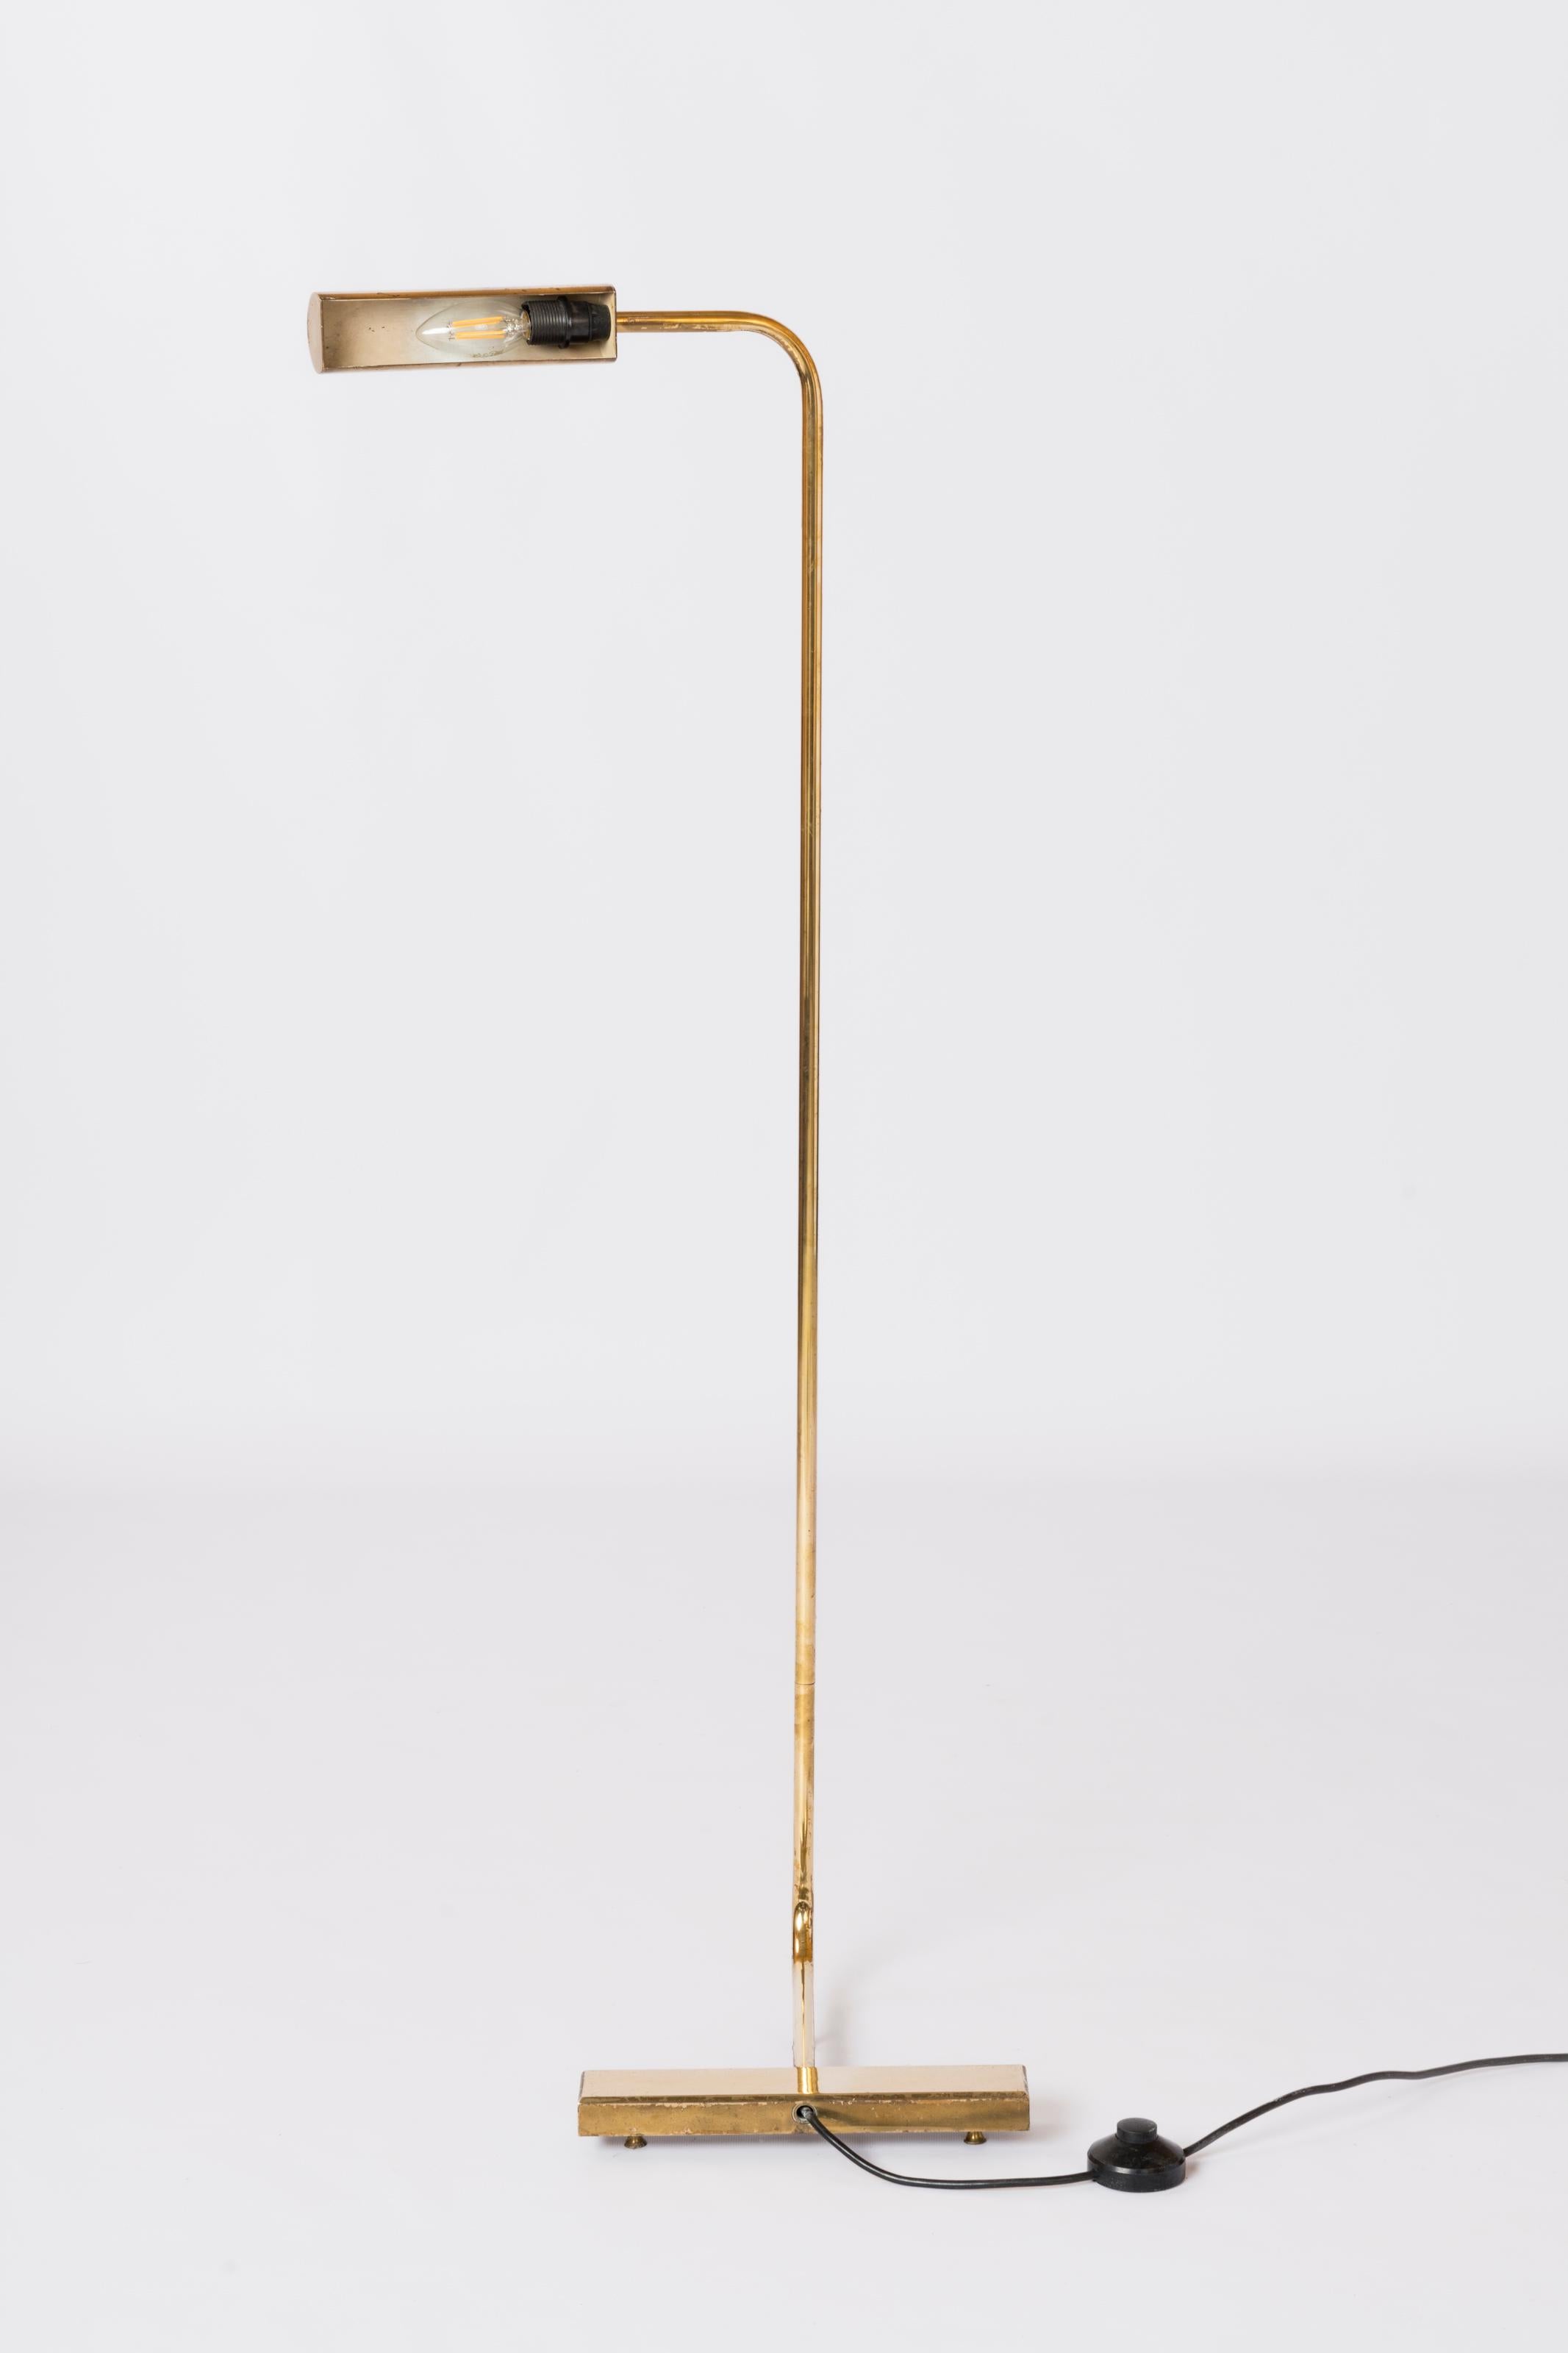 Sleek and iconic floor lamp or reading lamp attributed to Cedric Hartman.
Gilt bronze.
The upper section fully rotates horizontally. The shade rotates 360°.
In fair vintage condition.
European socket and wiring.
This lamp ships out of France and can